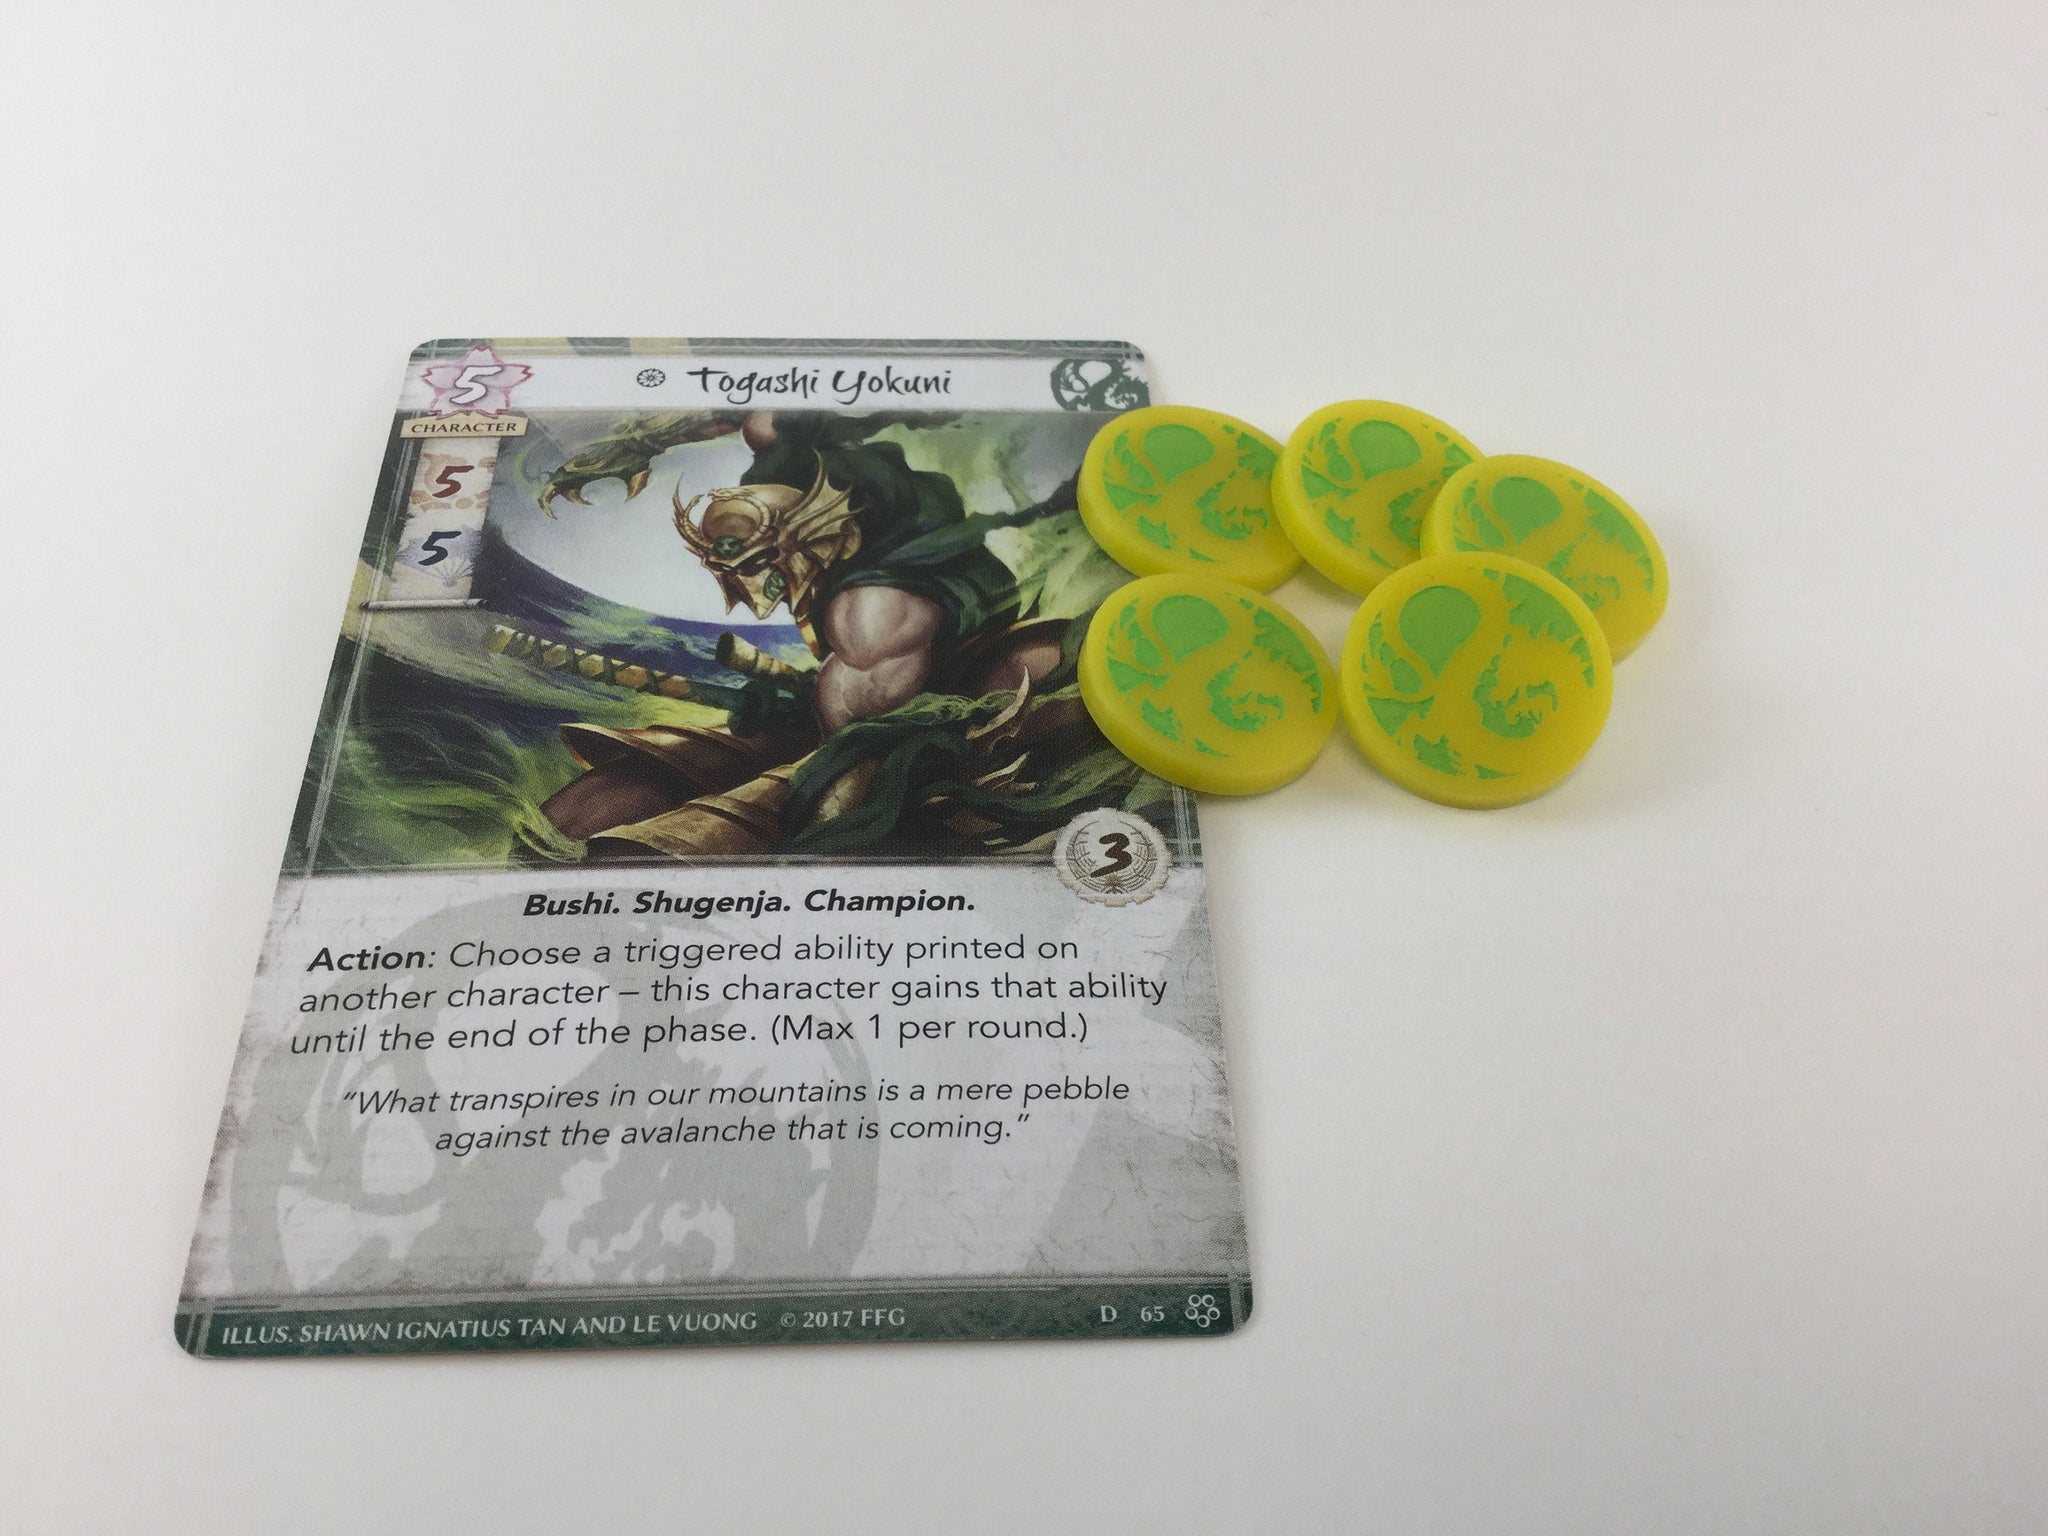 L5R - Legend of the Five Rings - Acrylic dragon clan fate tokens